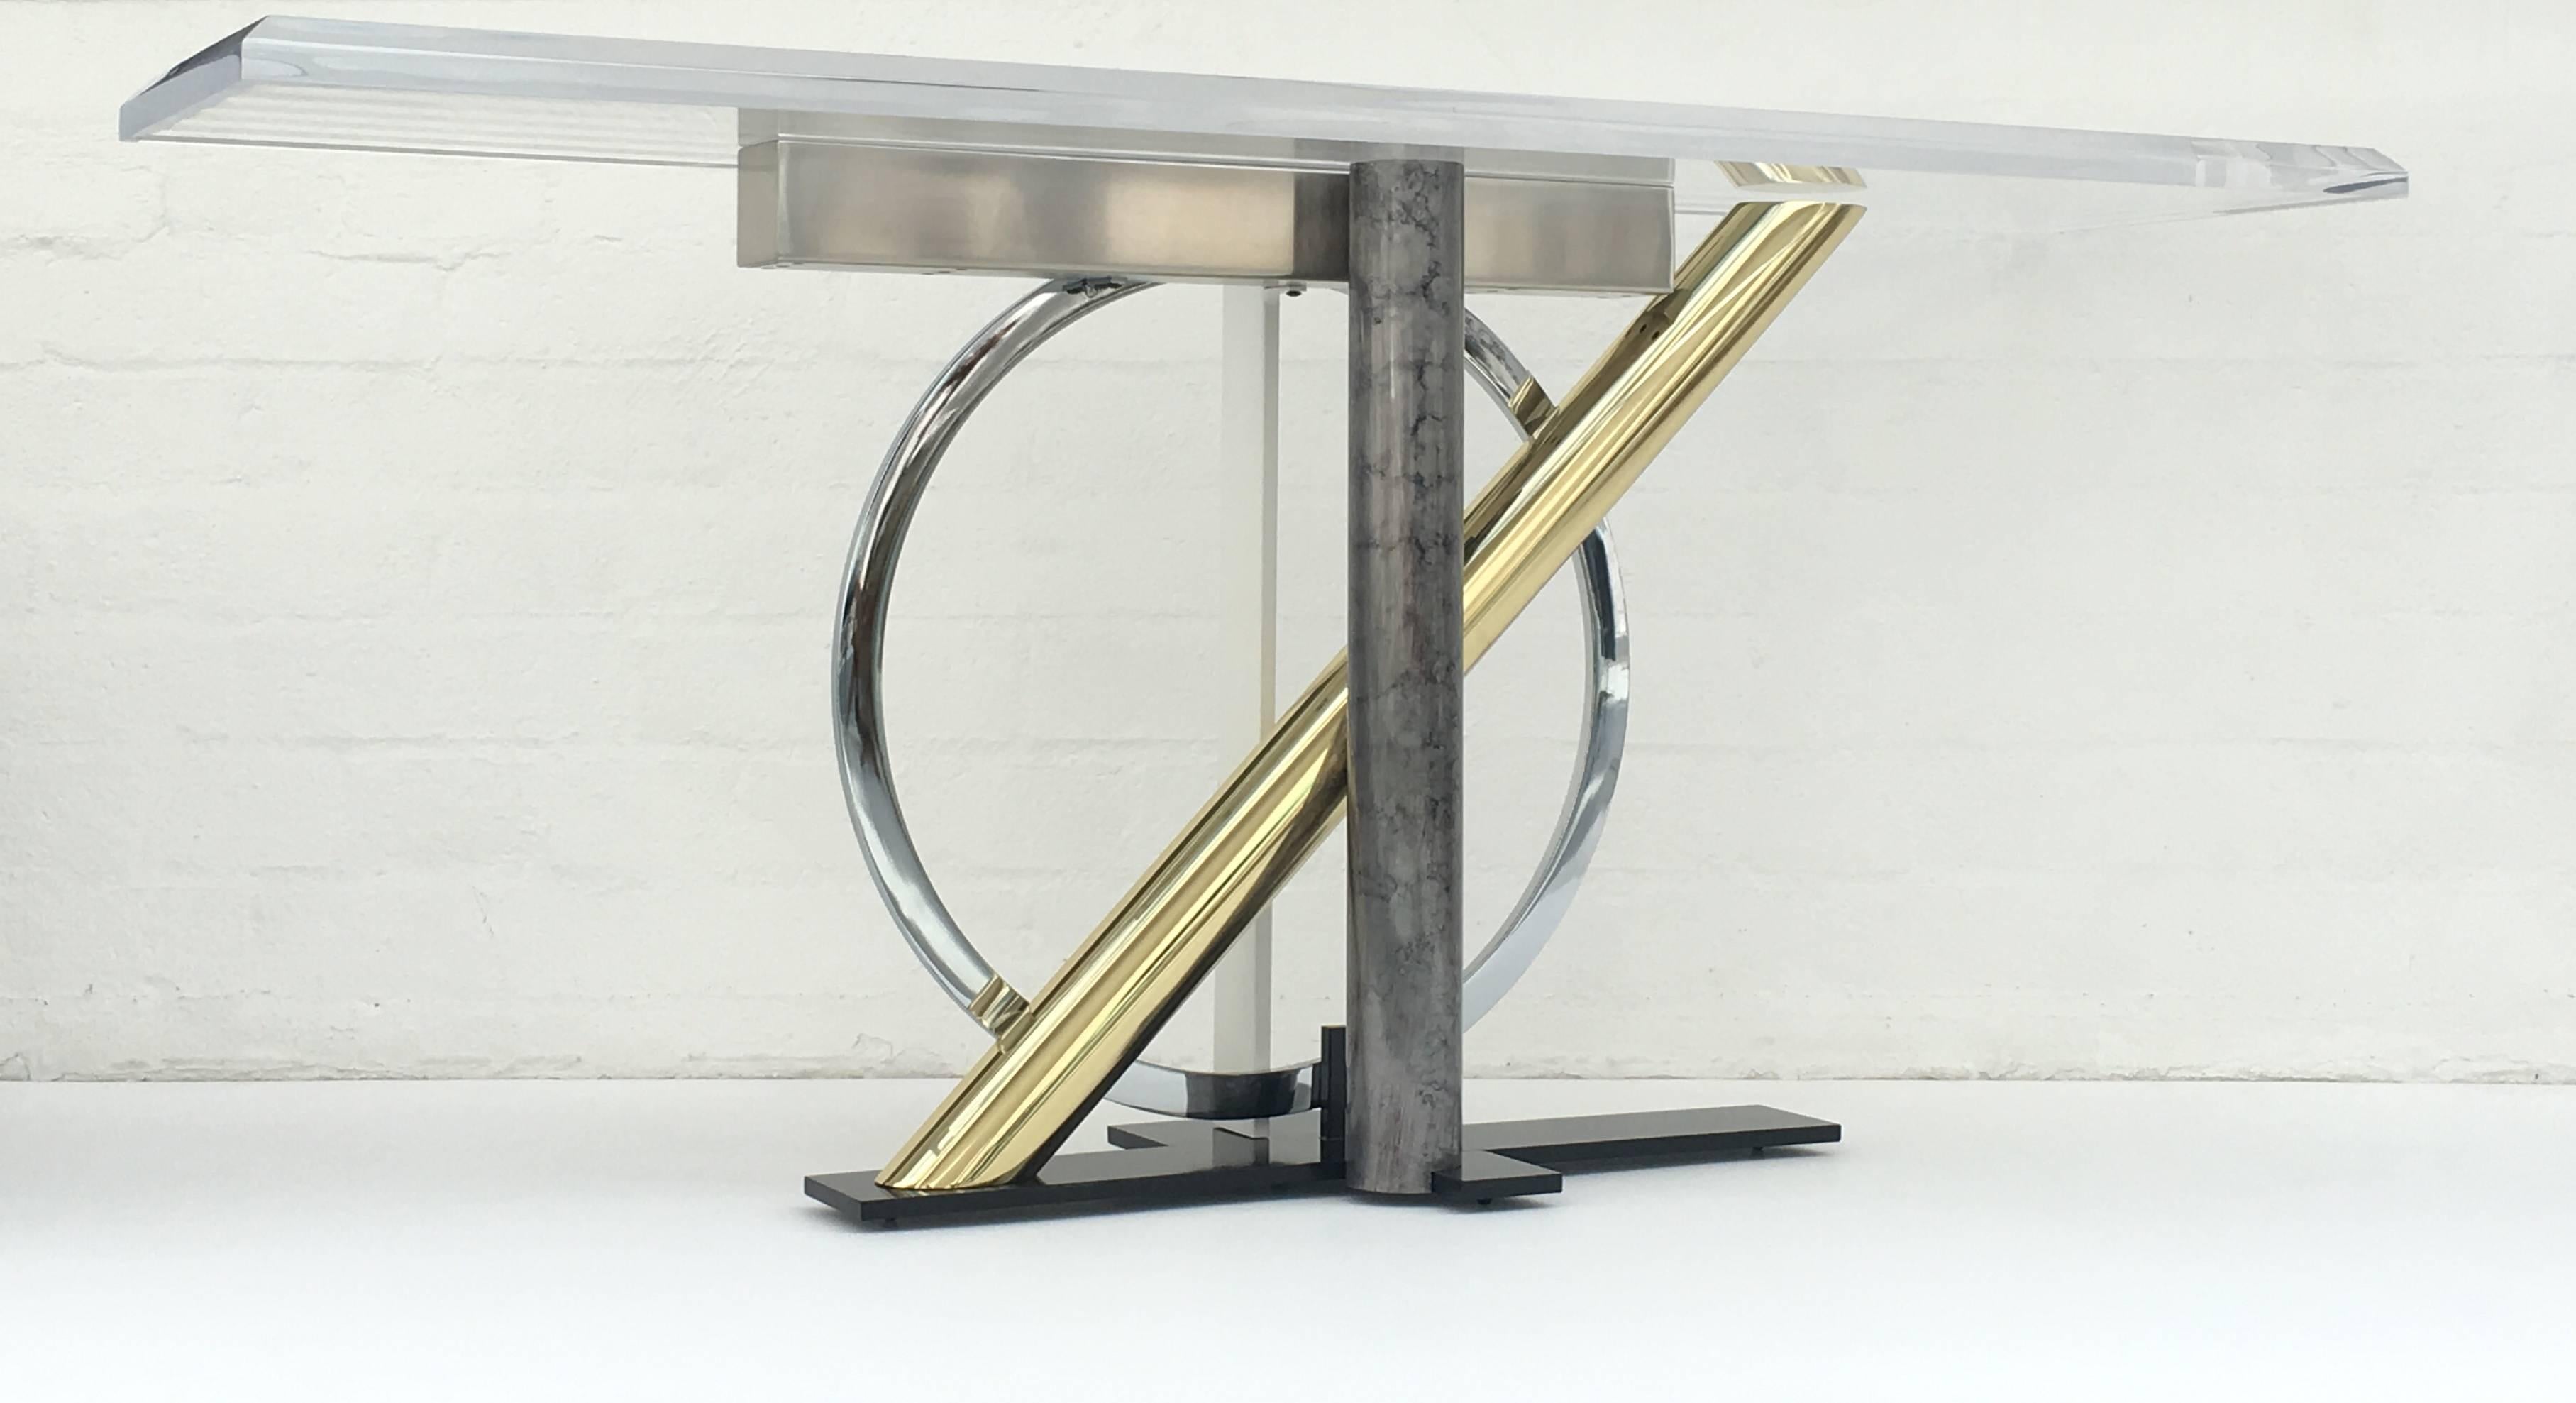 American Sculptural Console Table by Kaizo Oto for Design Institute of America